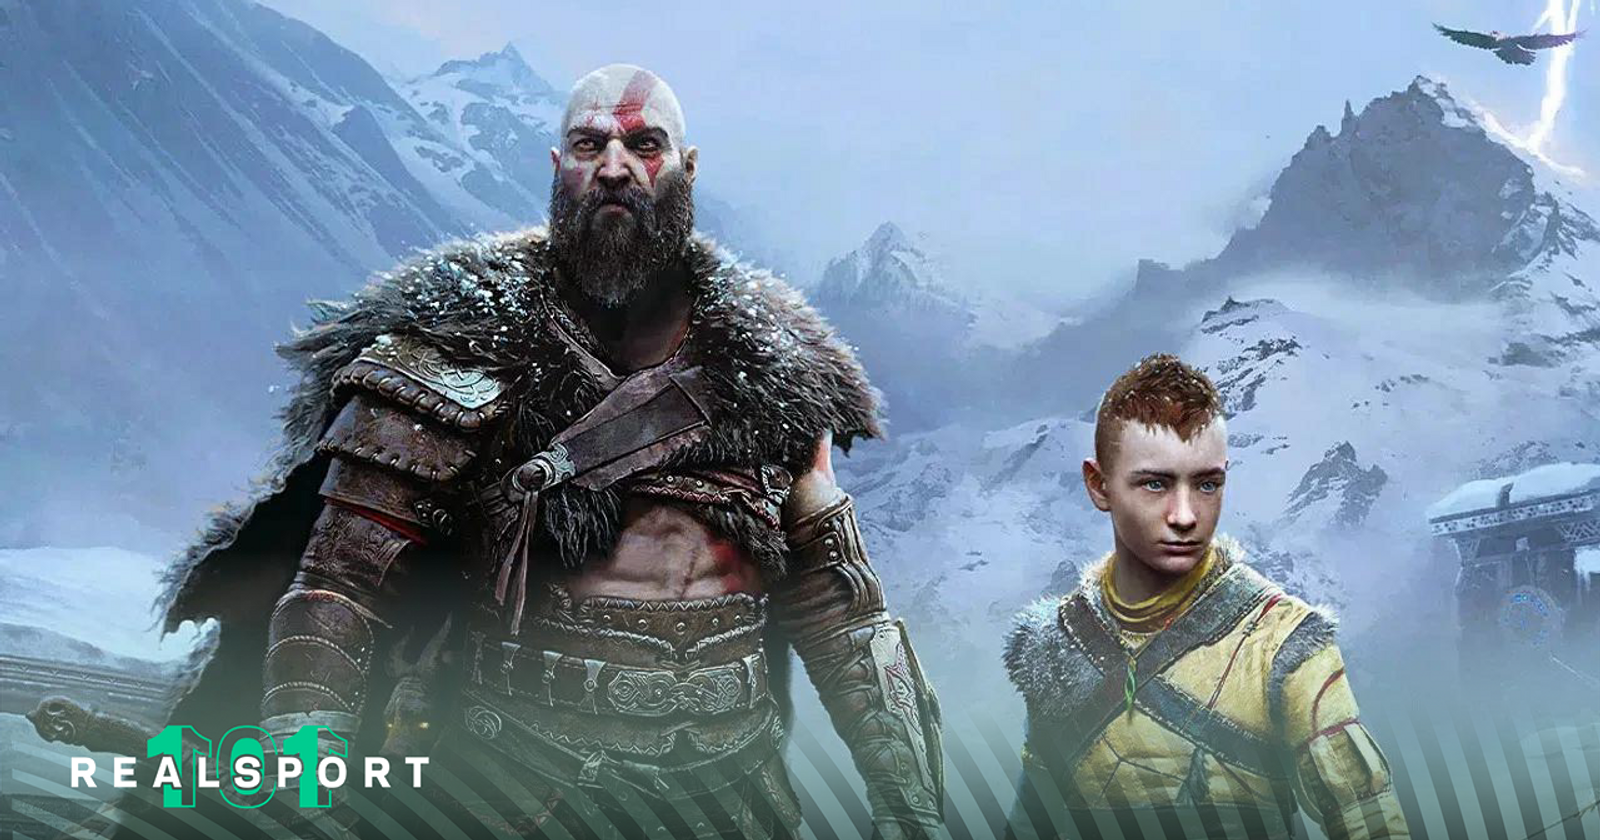 Everything You Need To Know About 'God Of War' Coming To PC